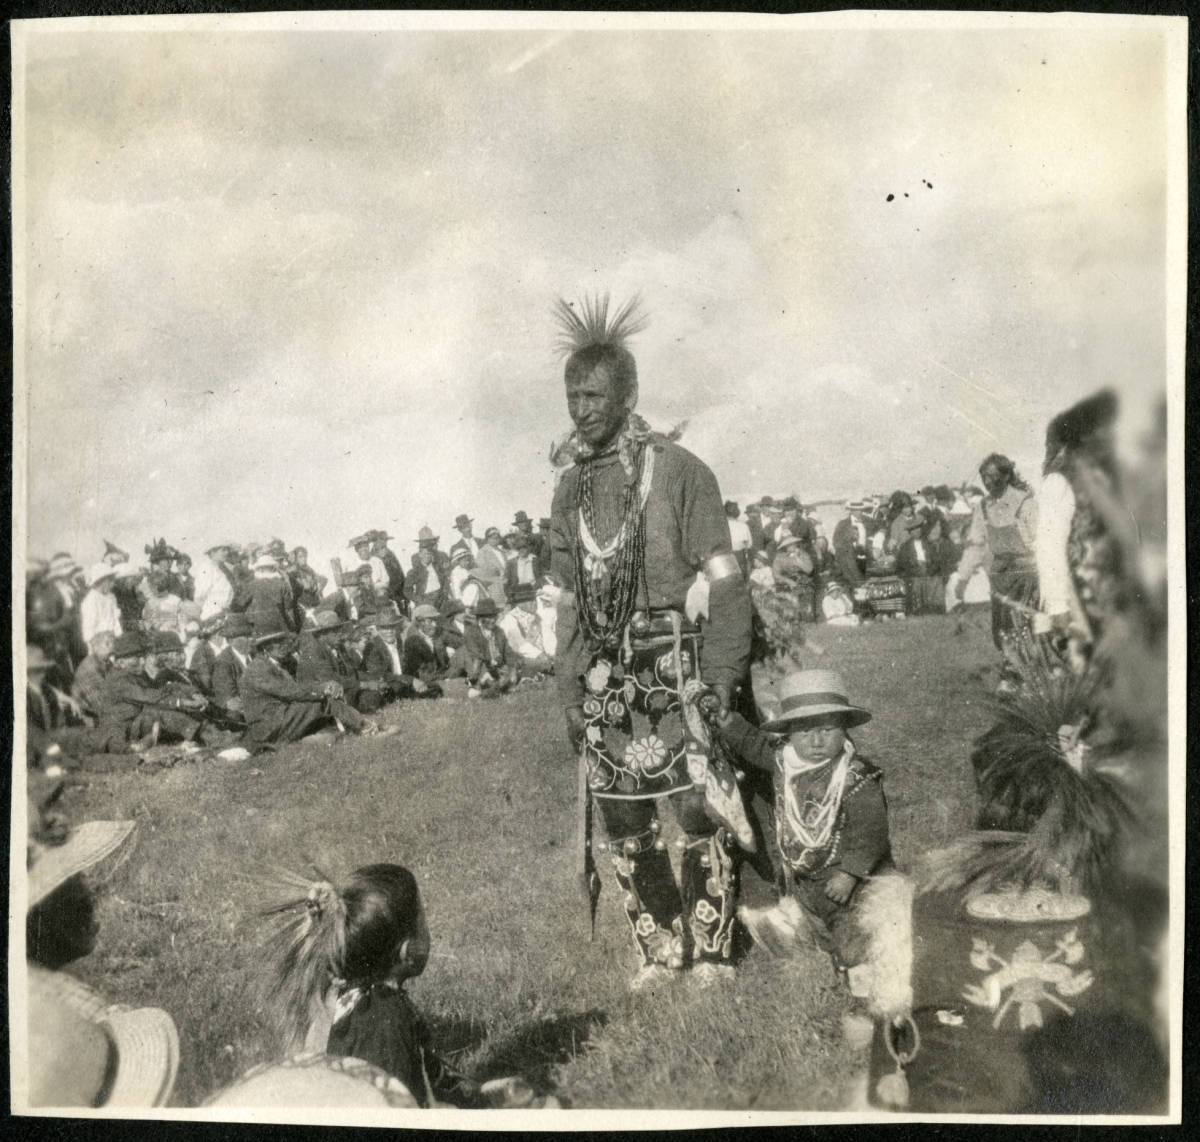 Ojibwe man and child dancing at the Annual White Earth Celebration and Pow Wow, 1916